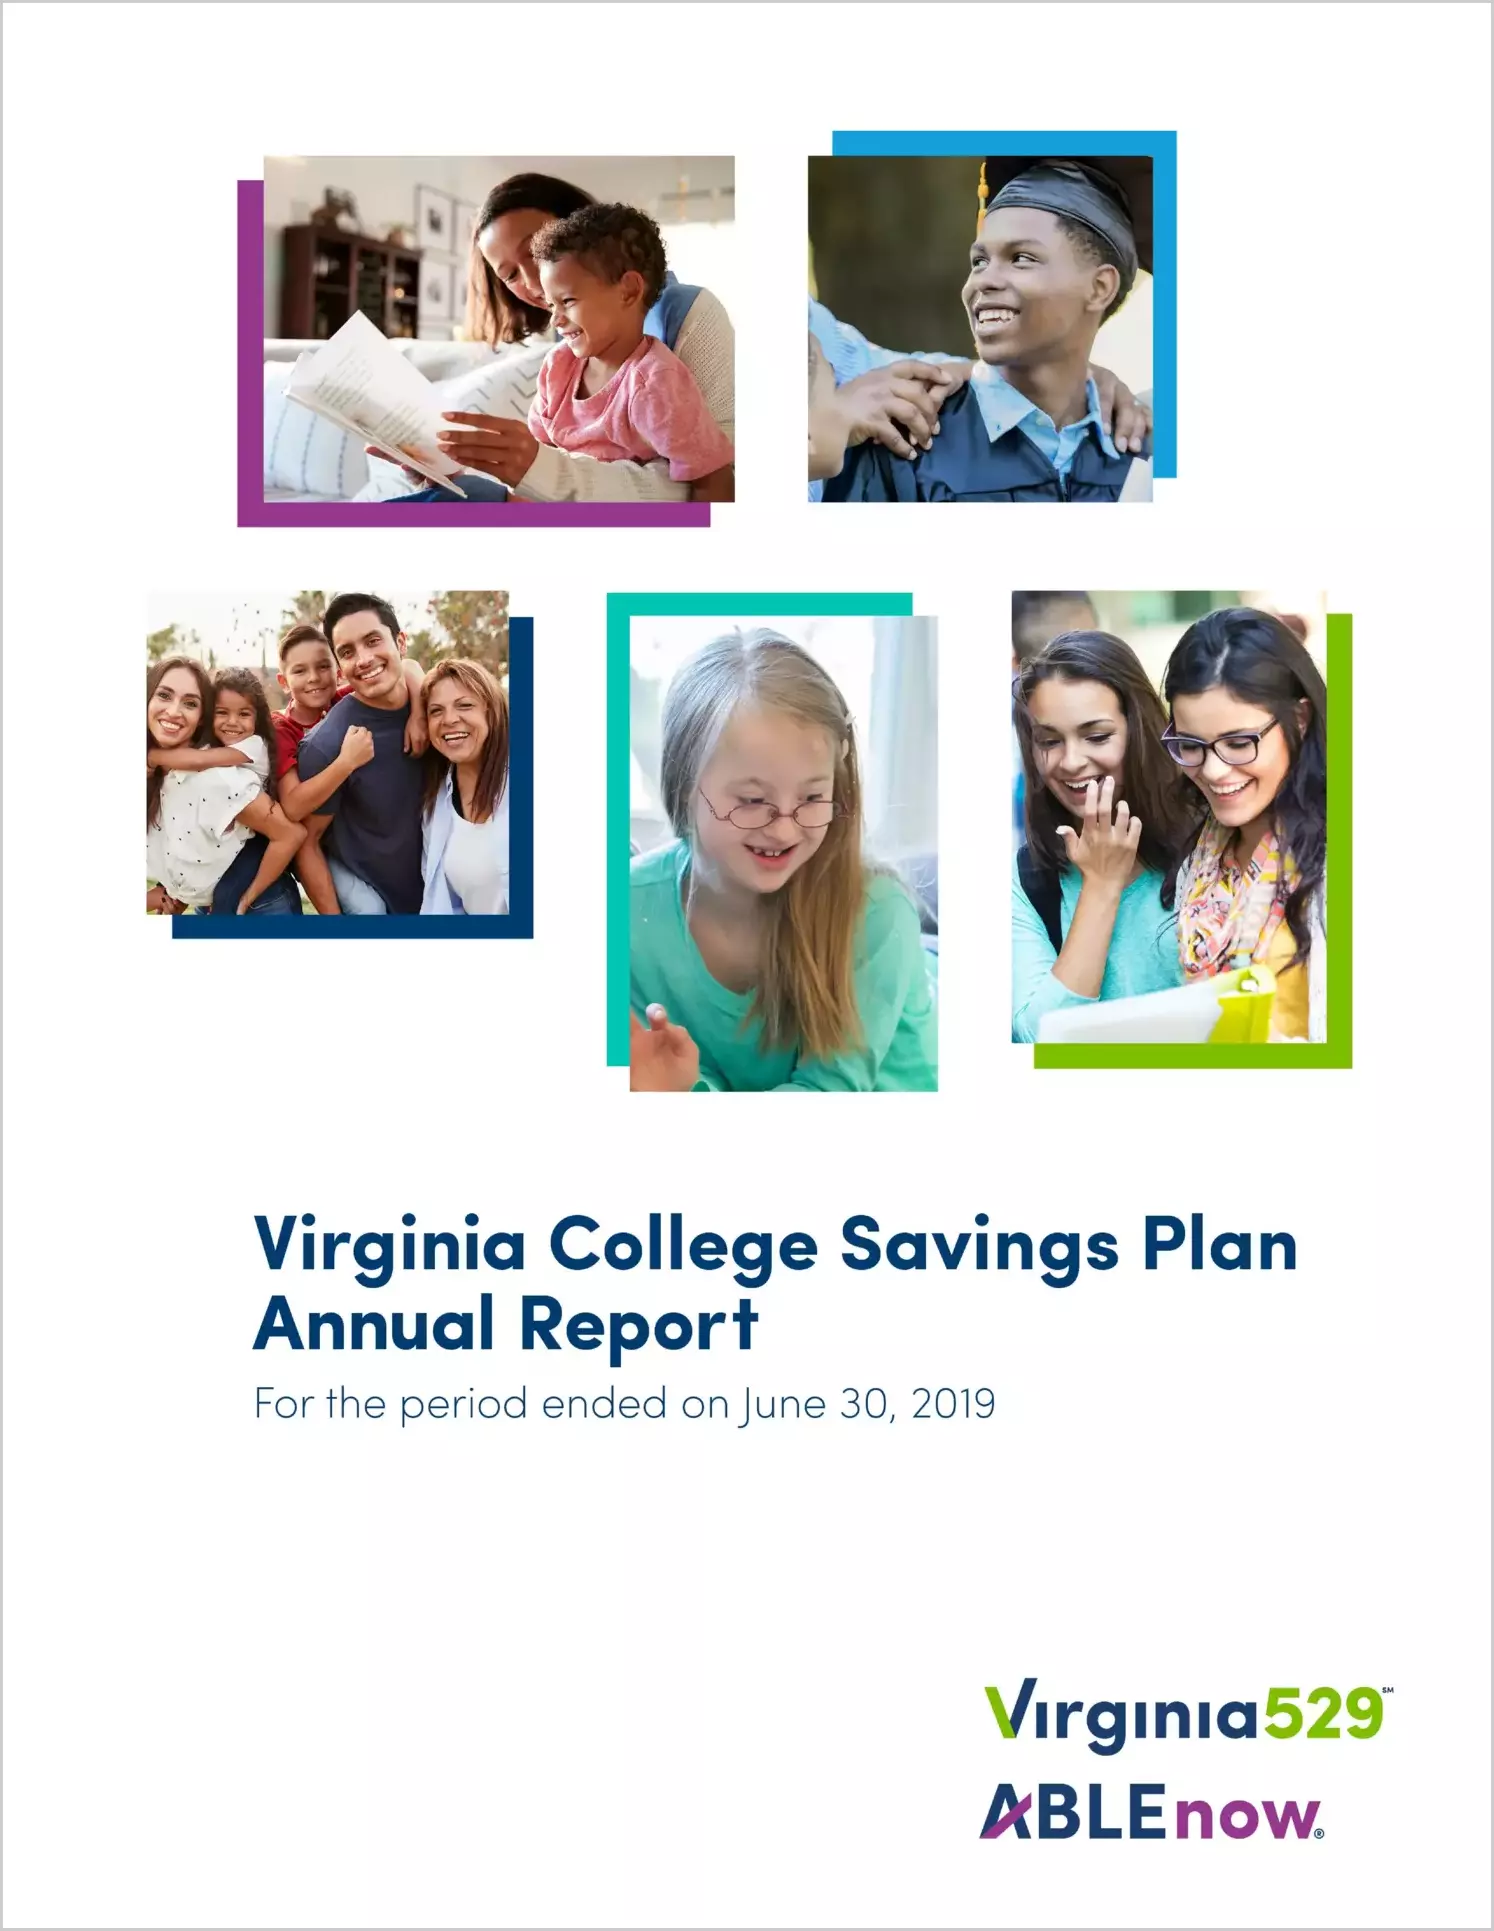 Virginia College Savings Plan Financial Statements & Internal Control Report for the year ended June 30, 2019